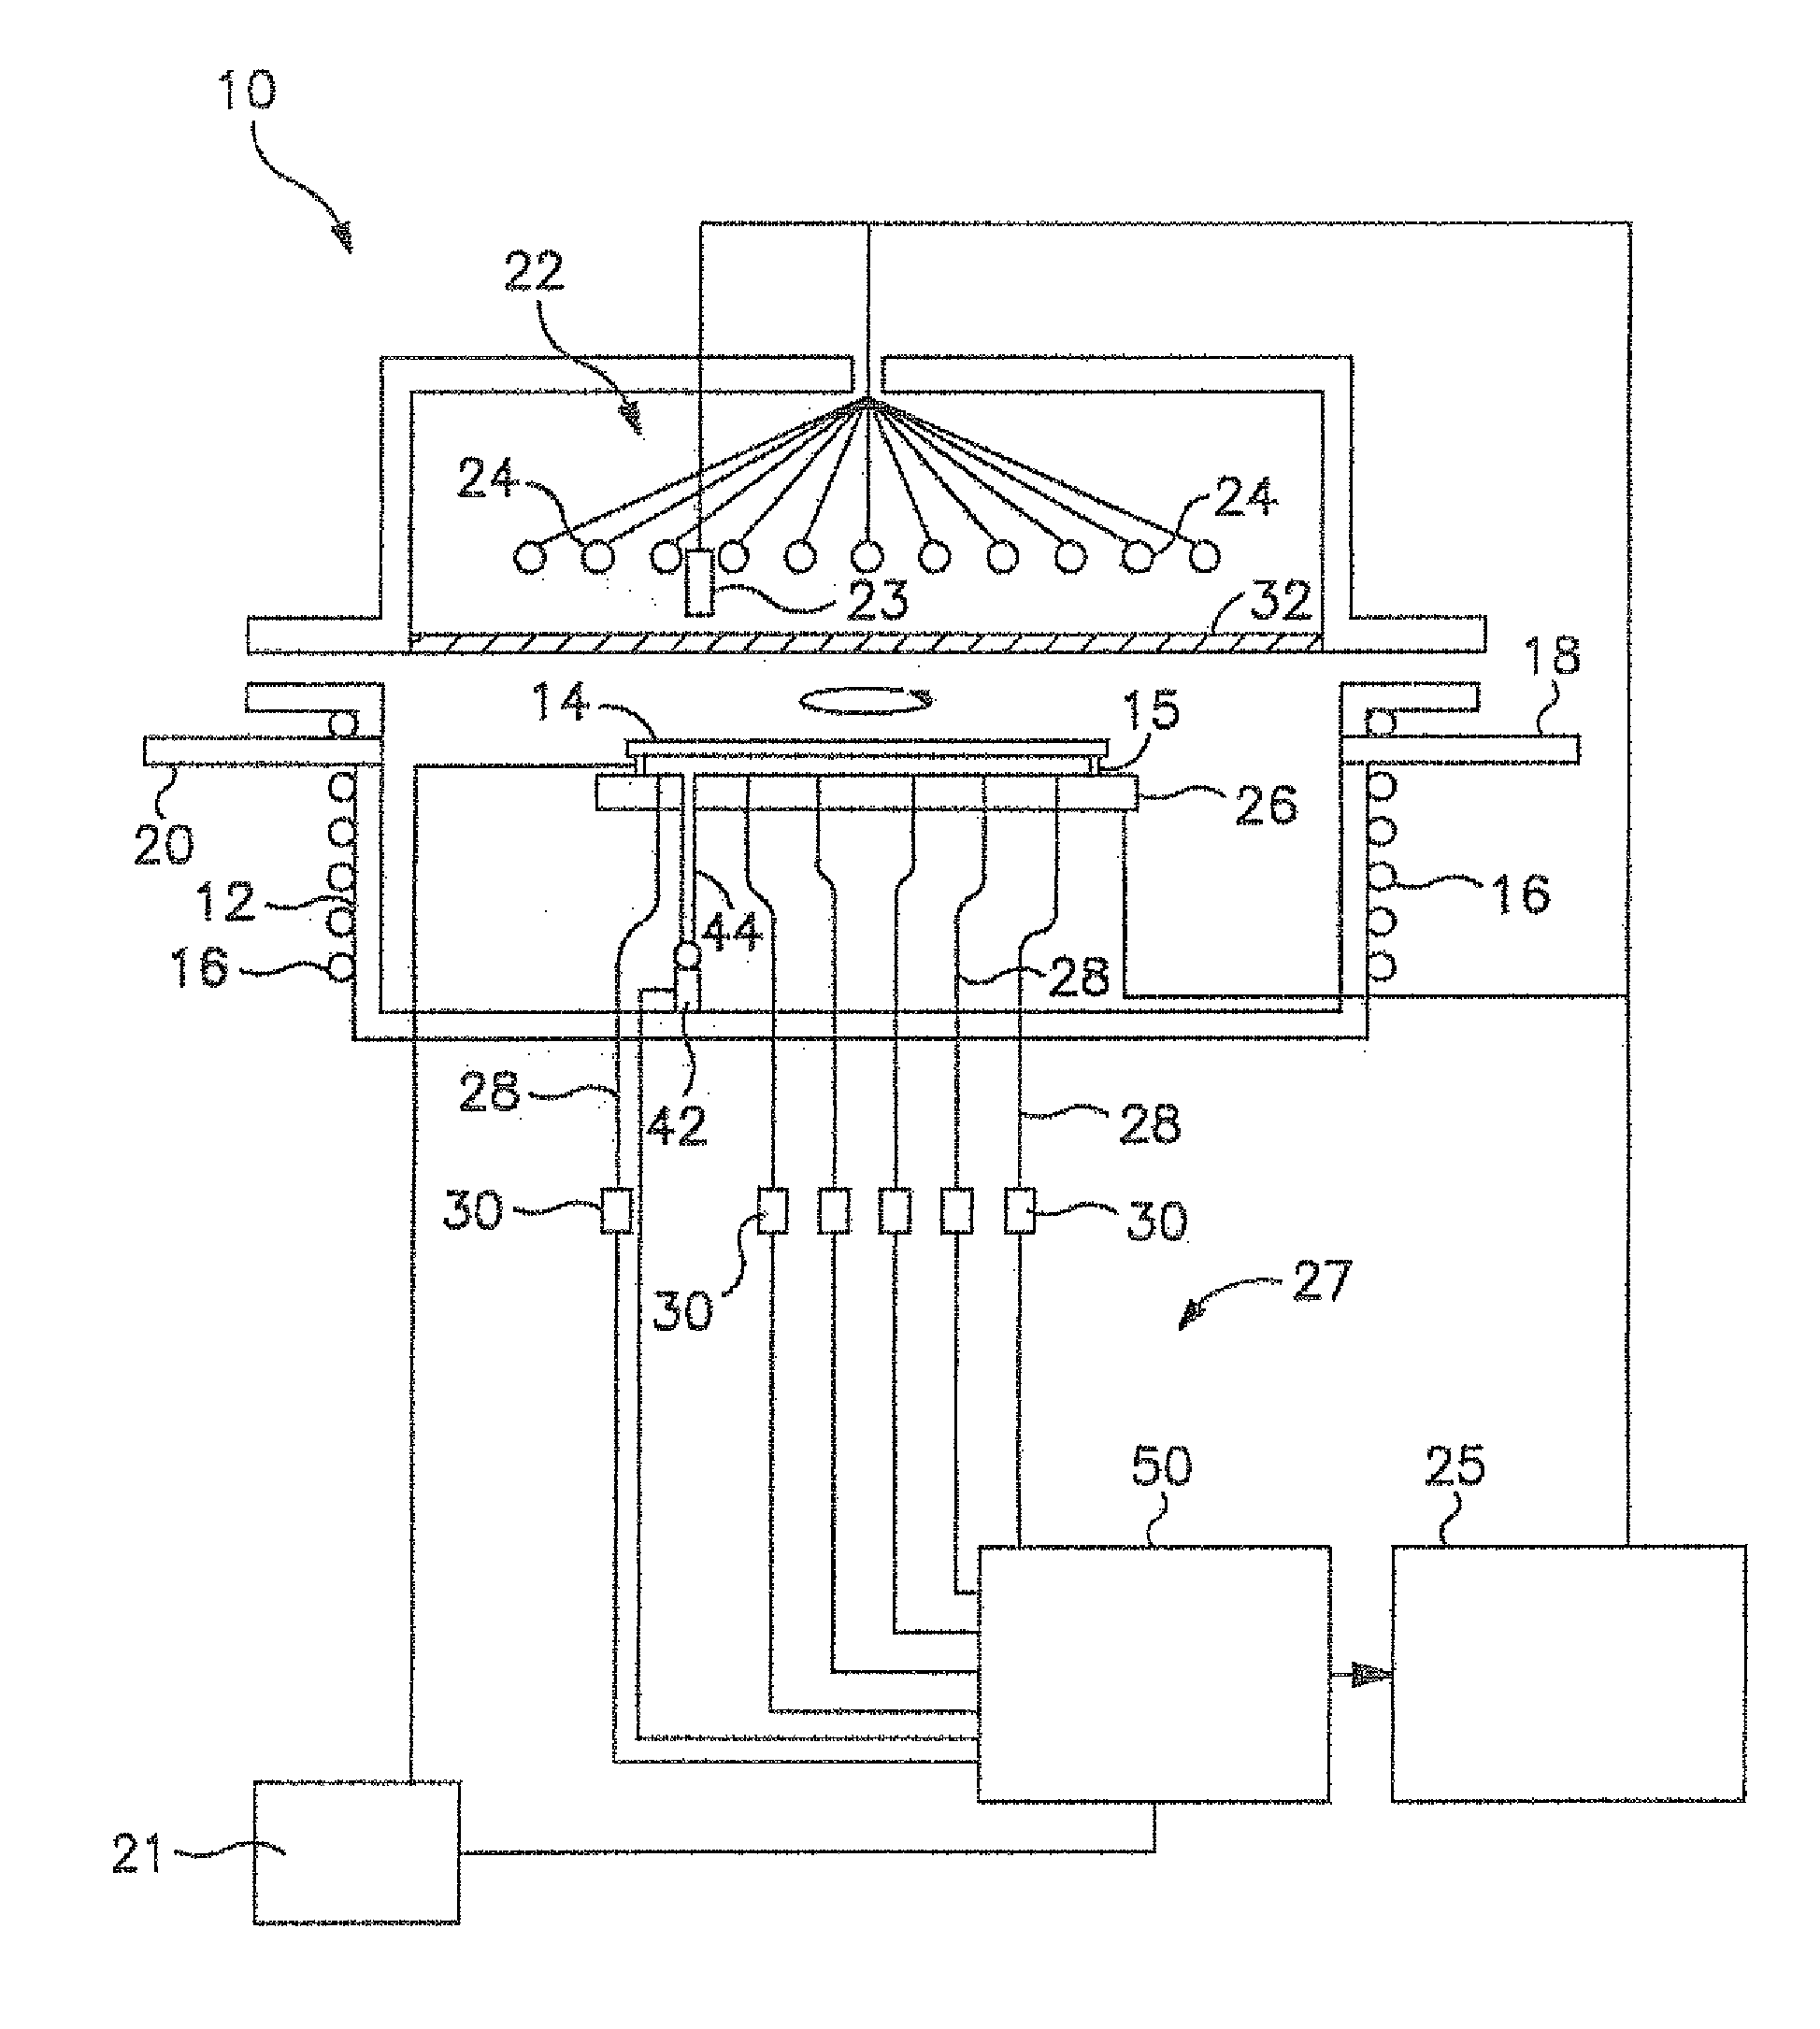 System and process for calibrating pyrometers in thermal processing chambers